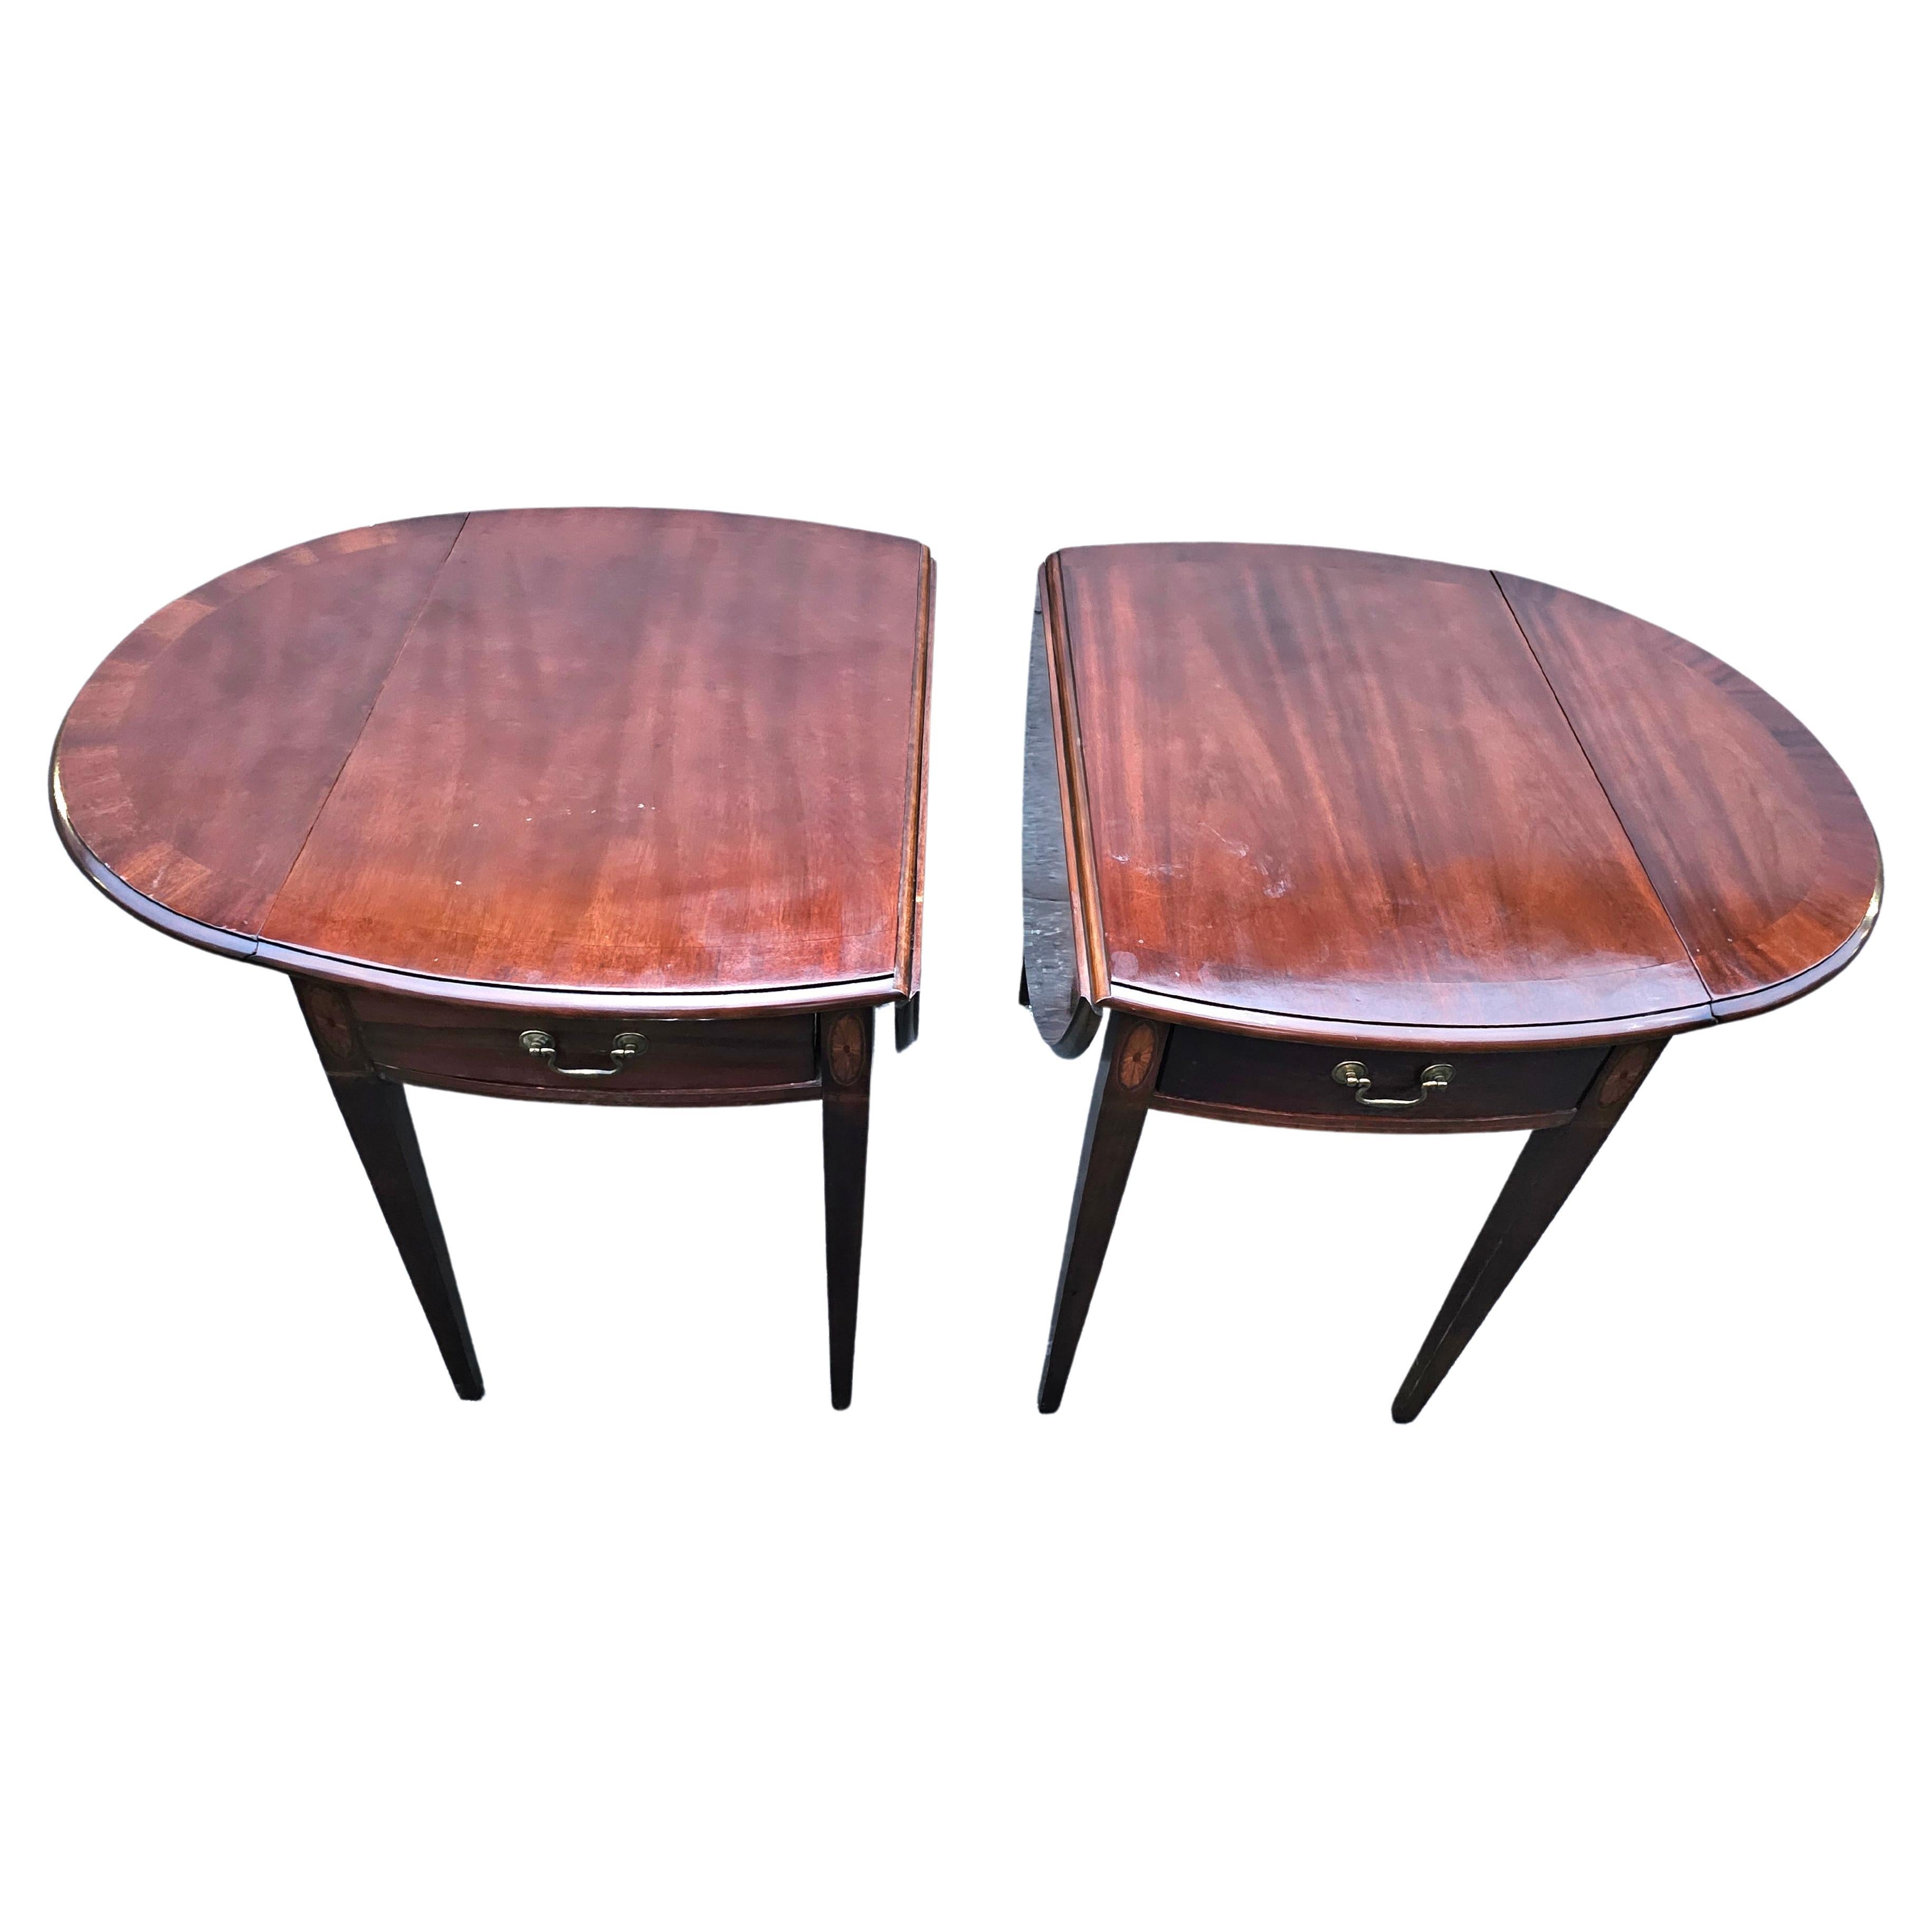 Pair of Magogany Banded and Satinwood Inlaid Pembroke Drop-Leaf Side Tables 2